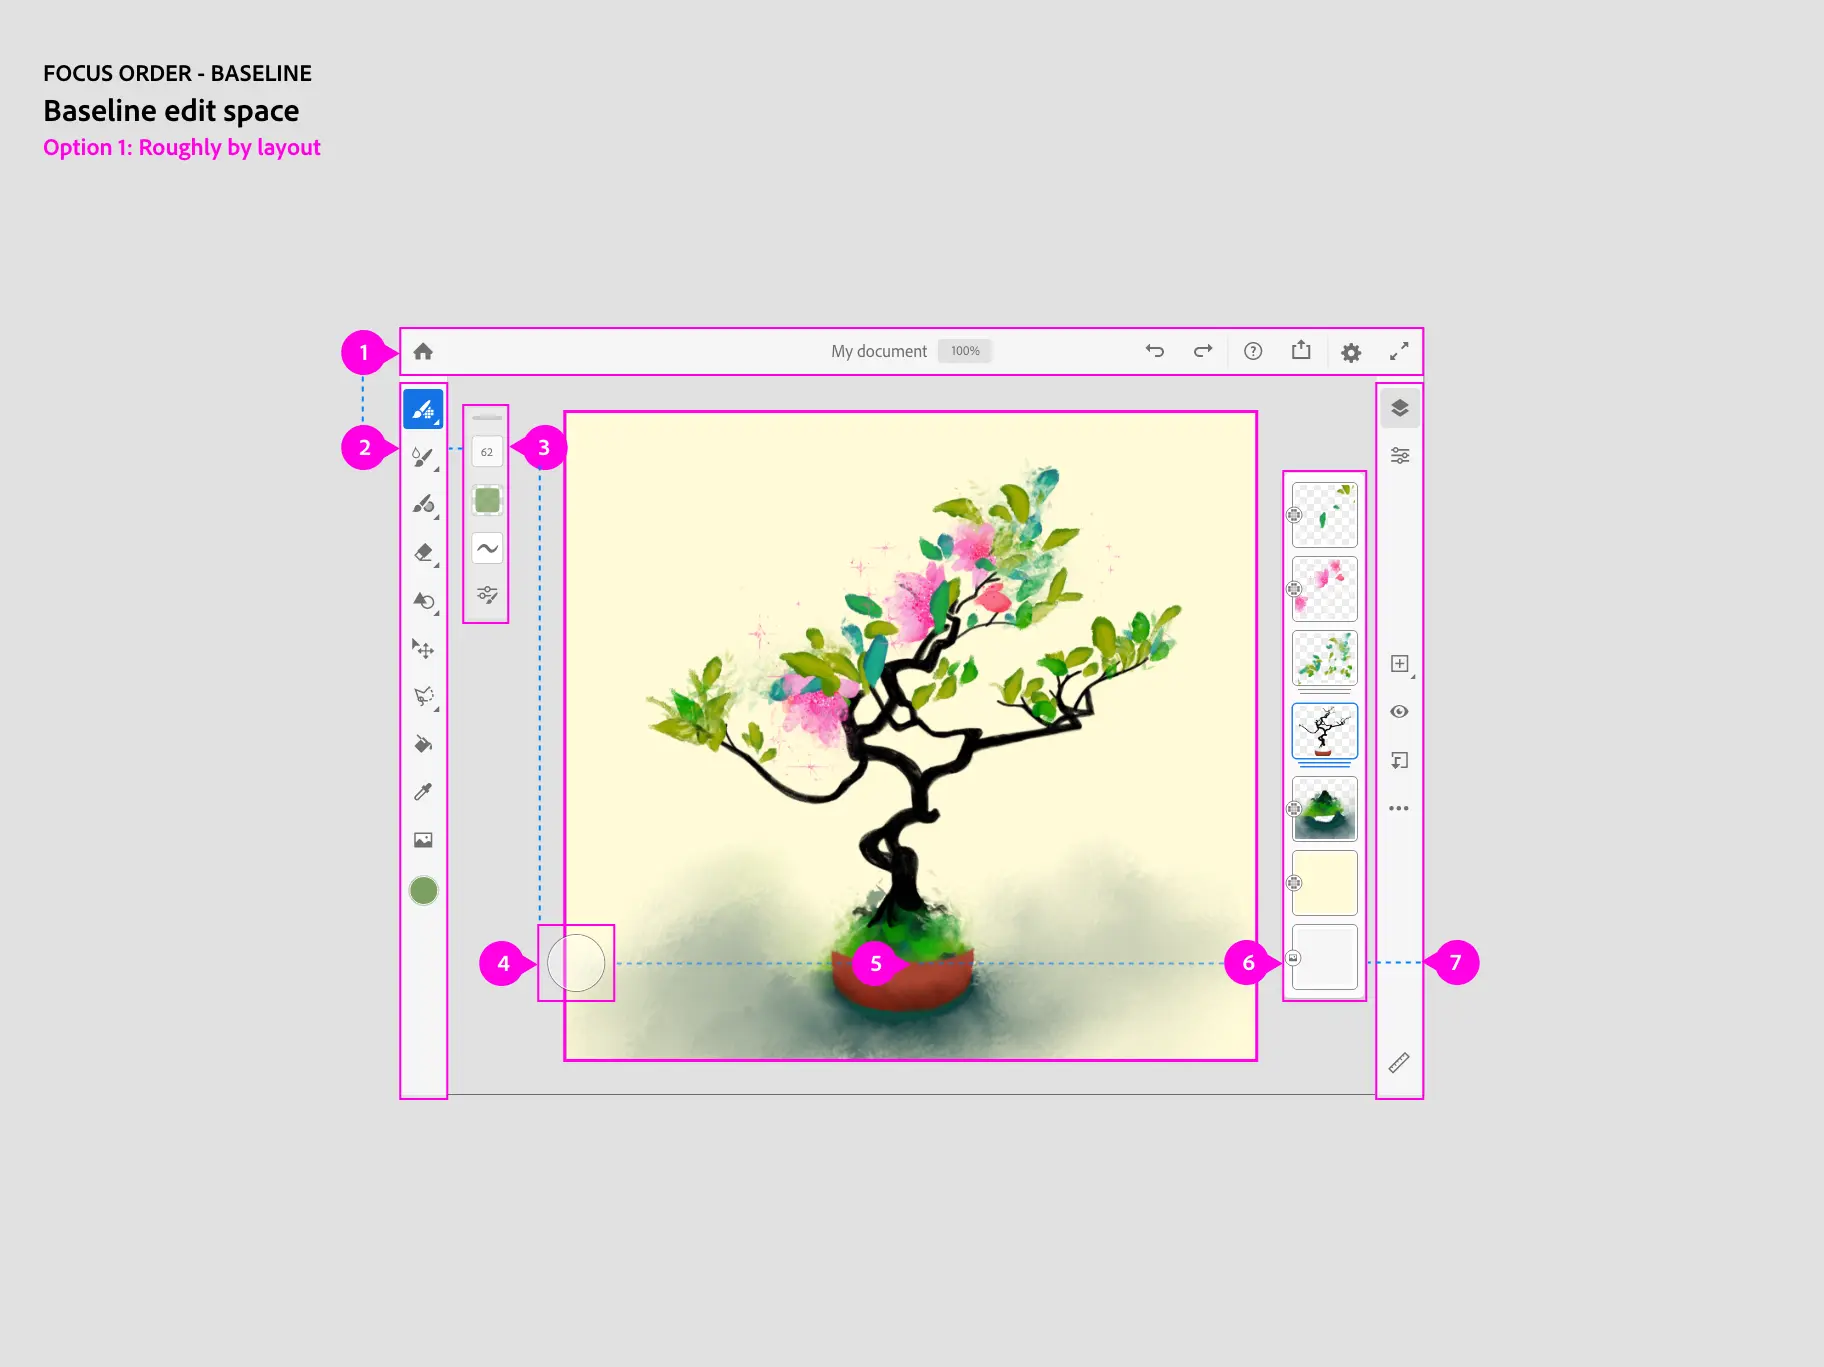 Fresco's main editing space with tools labeled sequentially; in the background a drawing of a potted camellia with a dark trunk, green/teal leaves, and pink flowers.